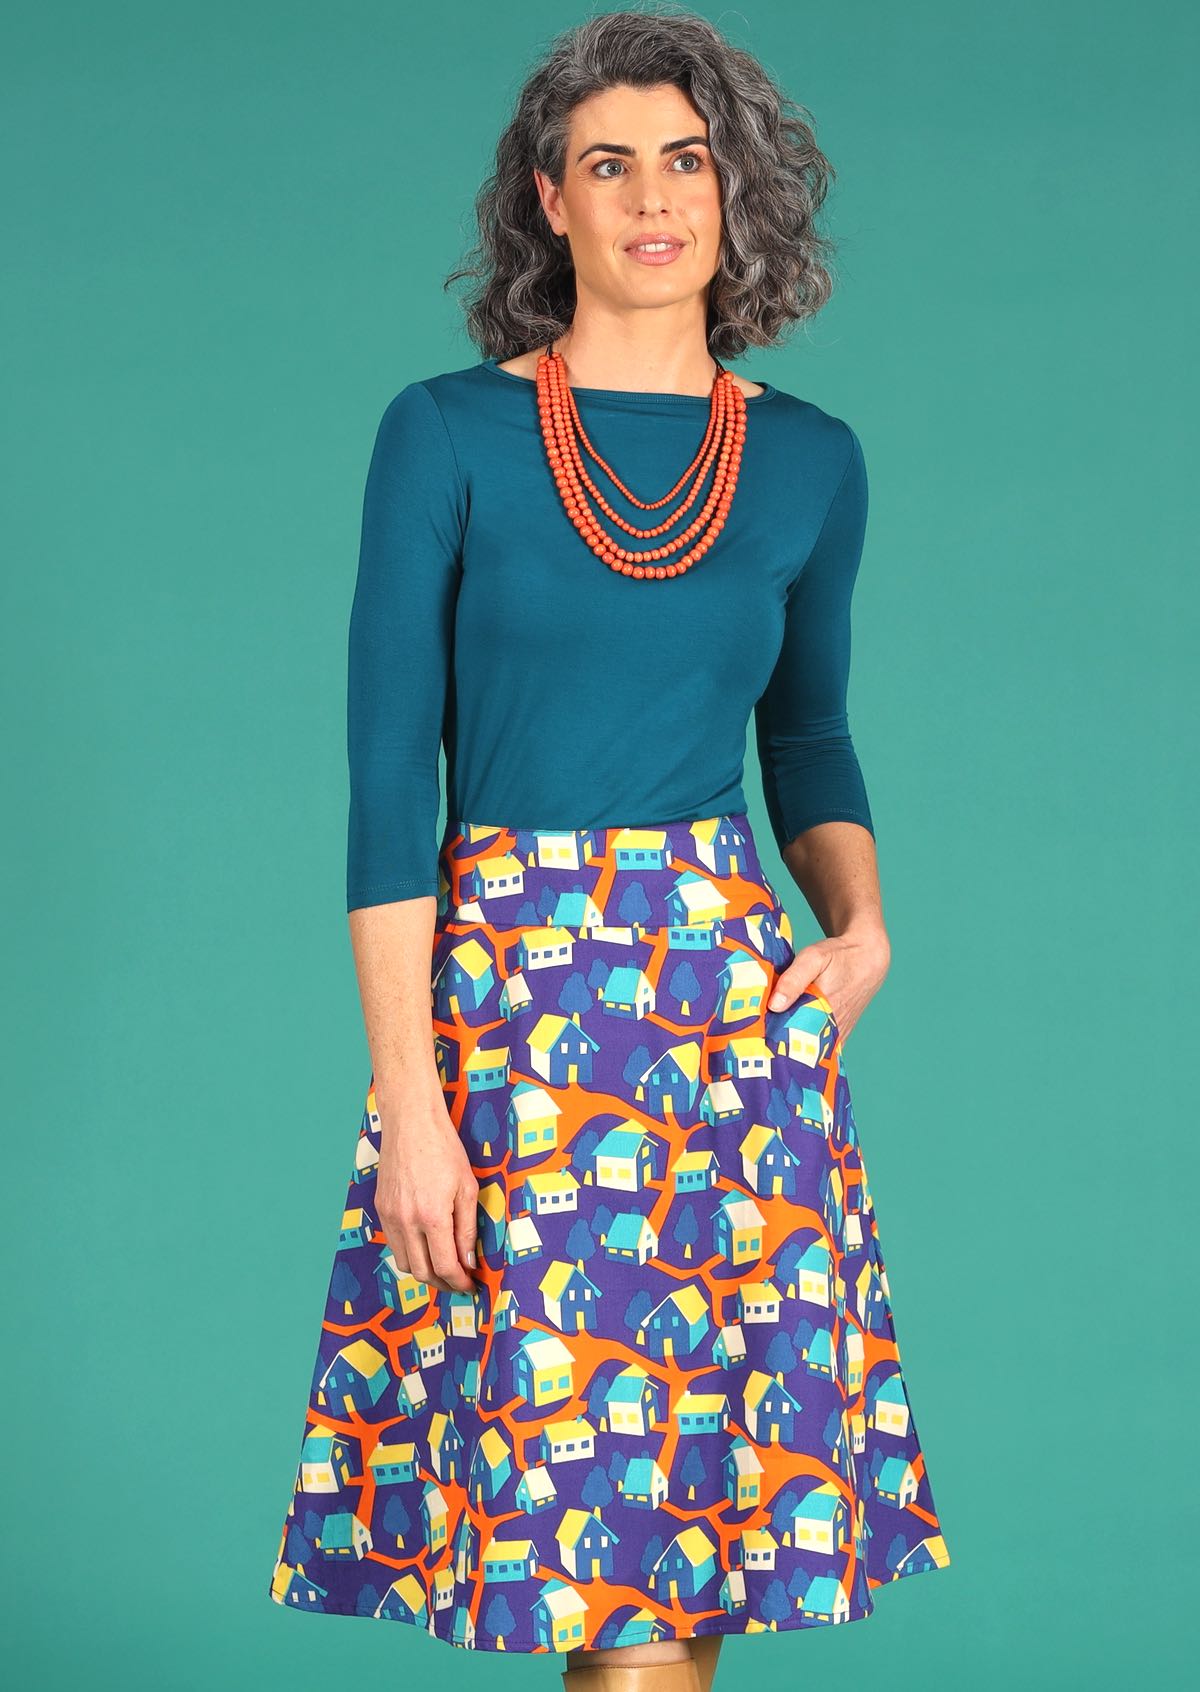 Generous A-line skirt with wide yoke and pockets